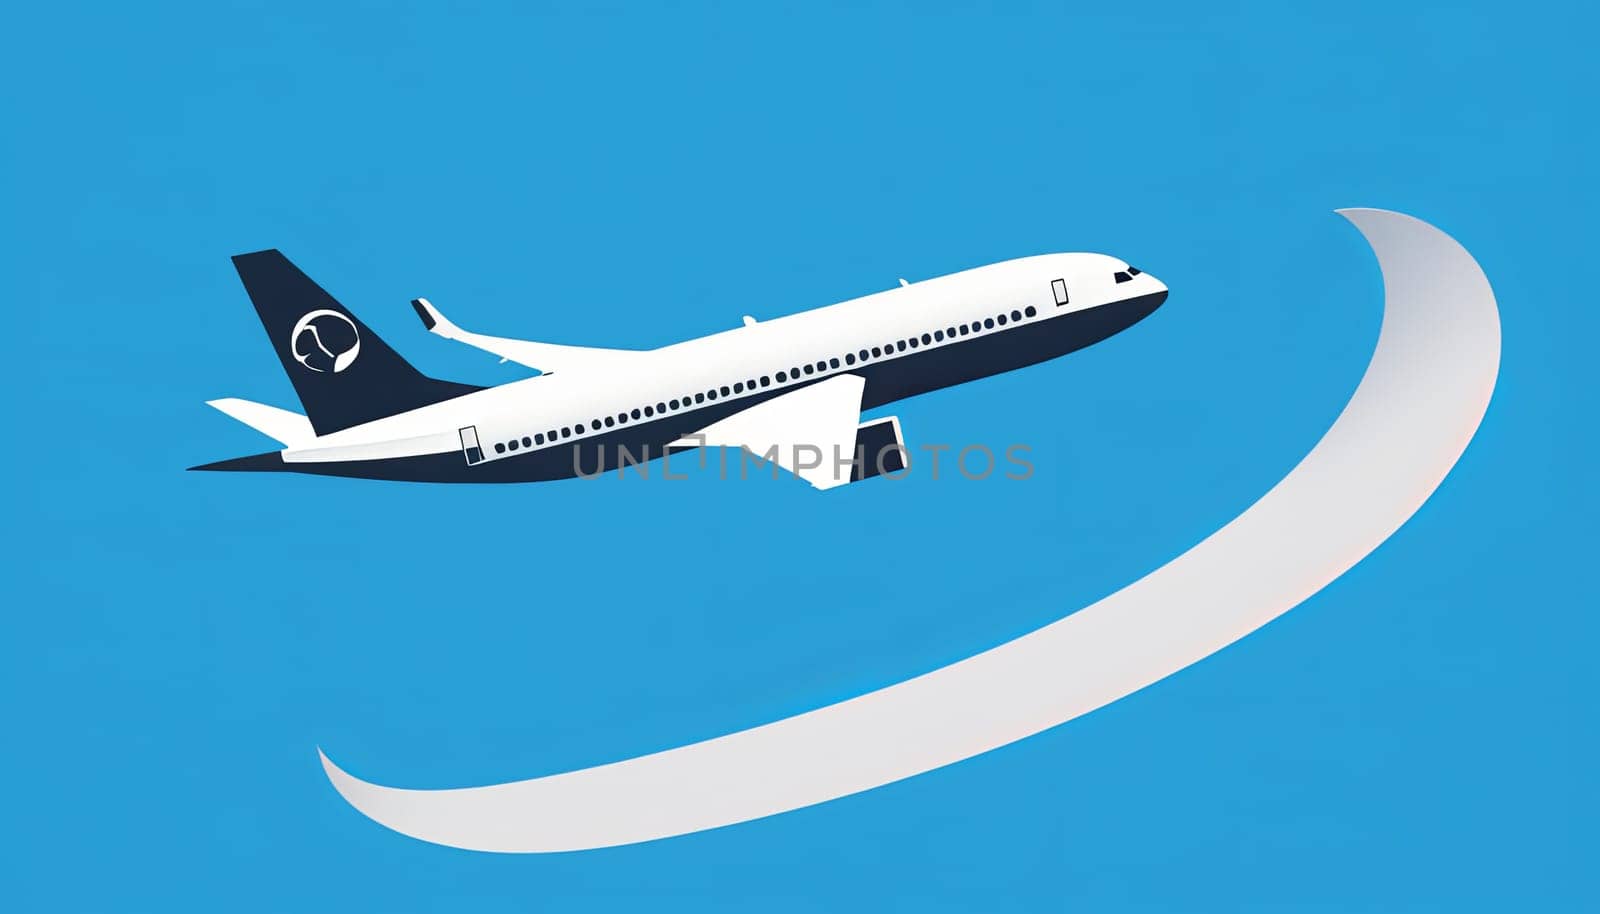 Illustration of a white commercial airplane on a blue background by Andre1ns